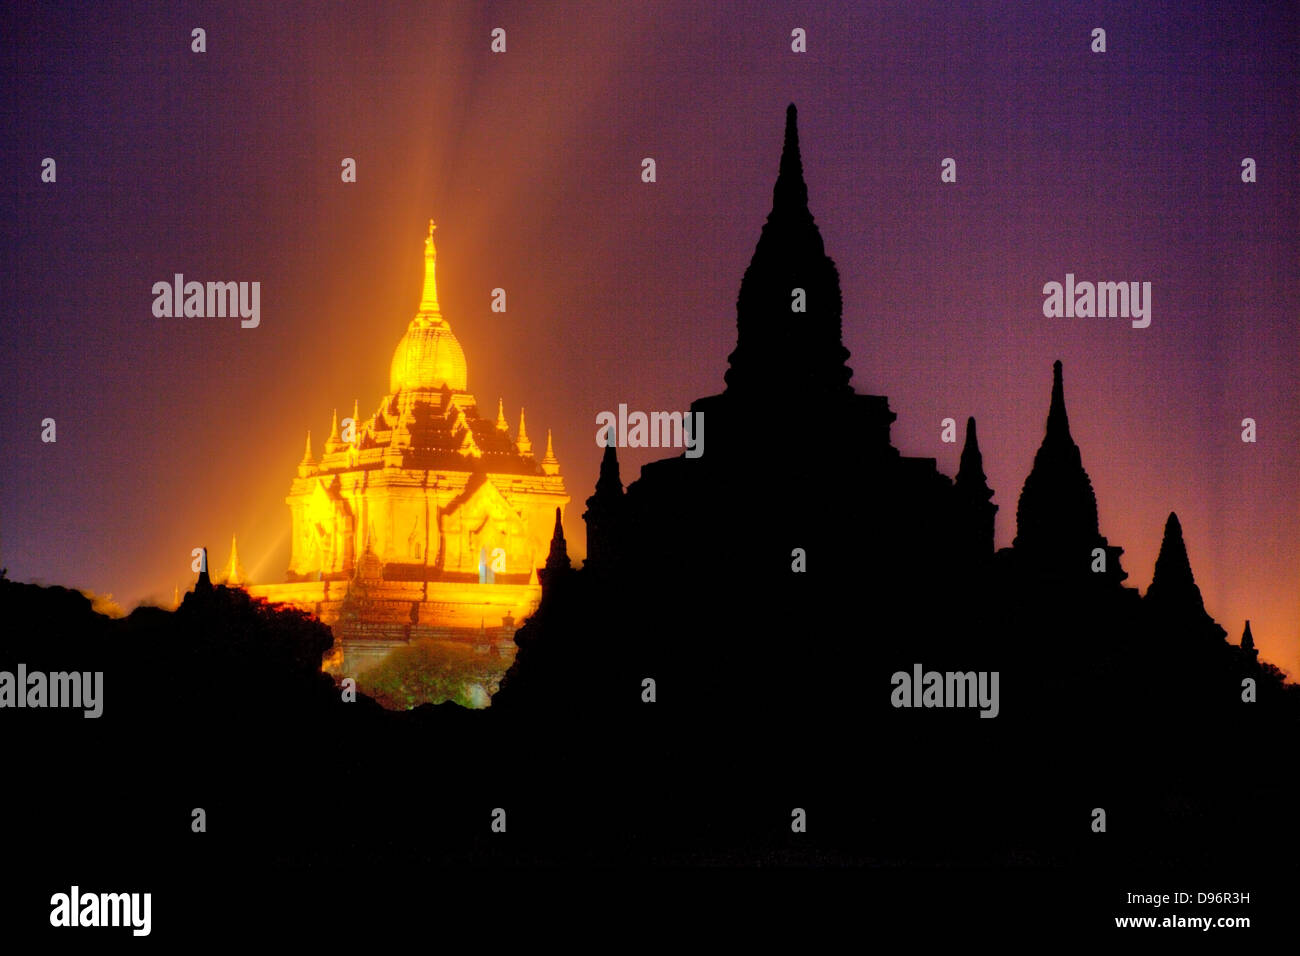 The ANANDA TEMPLE is lit like a jewel at night - BAGAN, MYANMAR Stock Photo